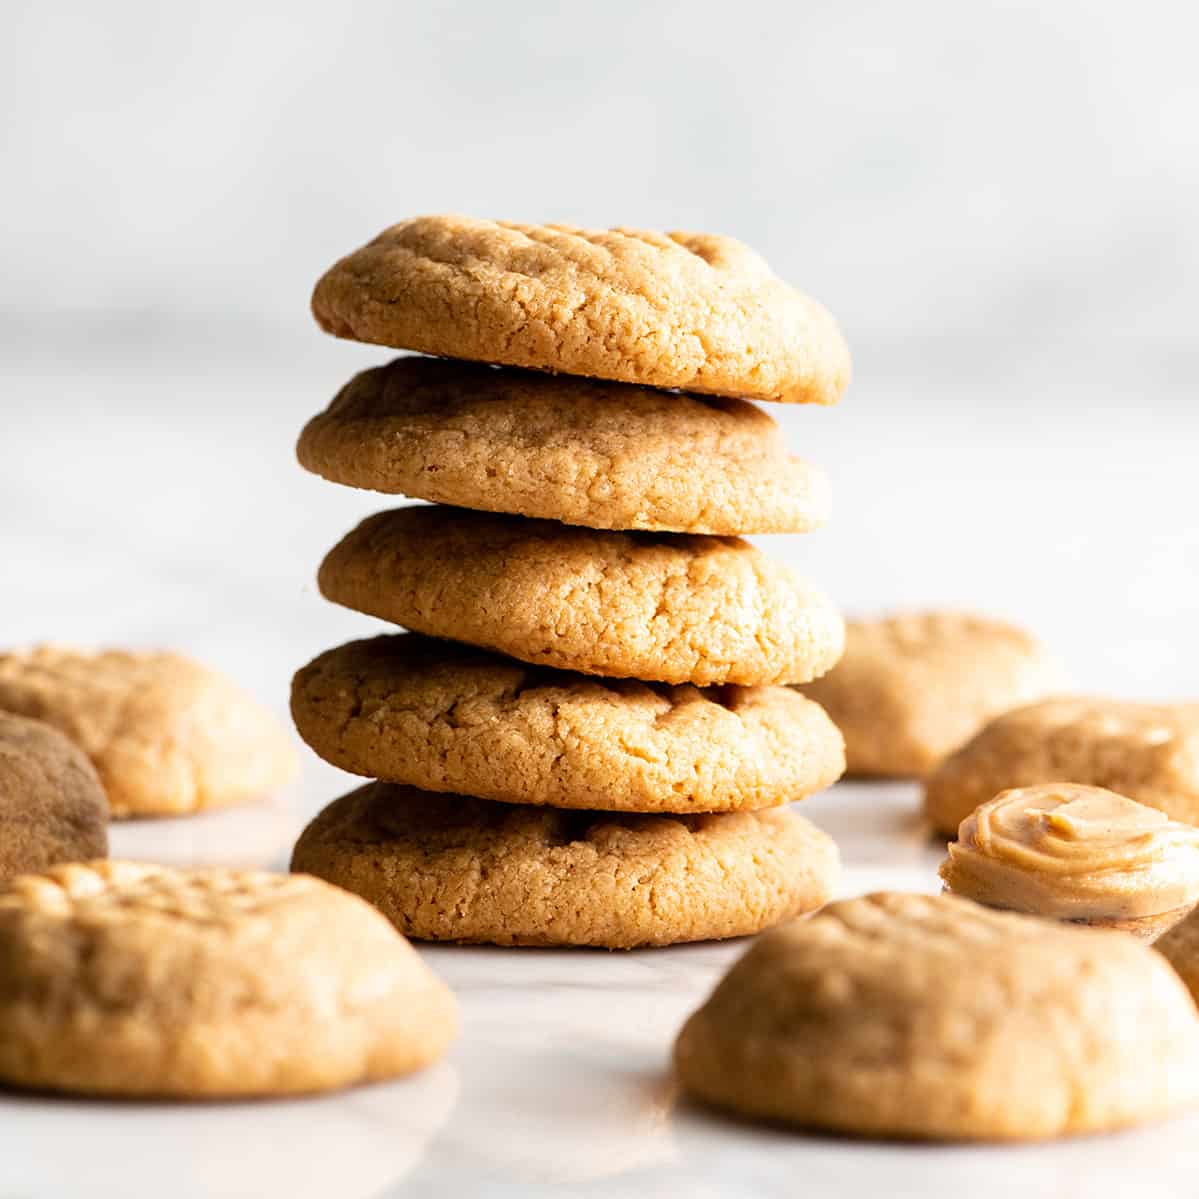 front view of a stack of 4 flourless peanut butter cookies with other cookies around the stack on the table